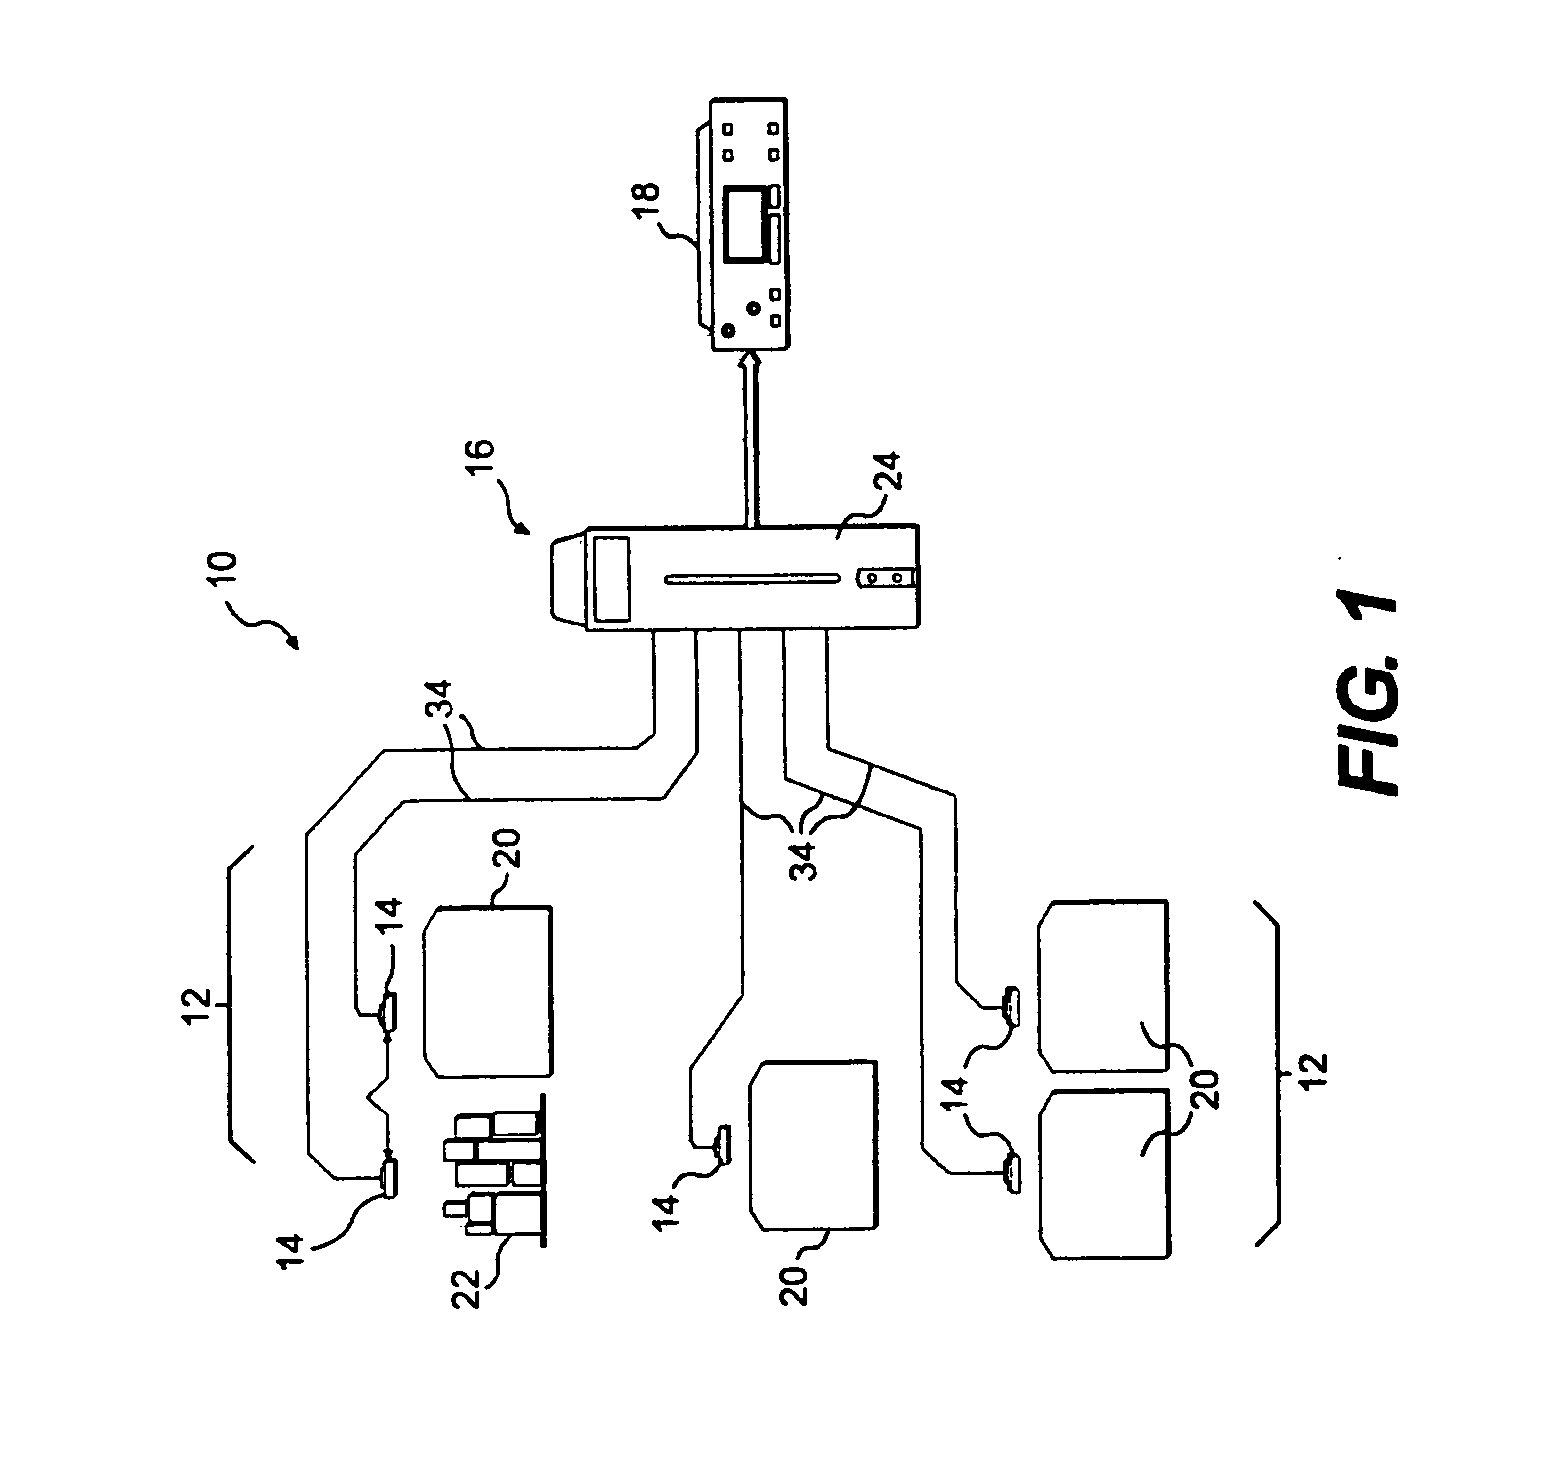 Fire sensor, fire detection system, fire suppression system, and combinations thereof